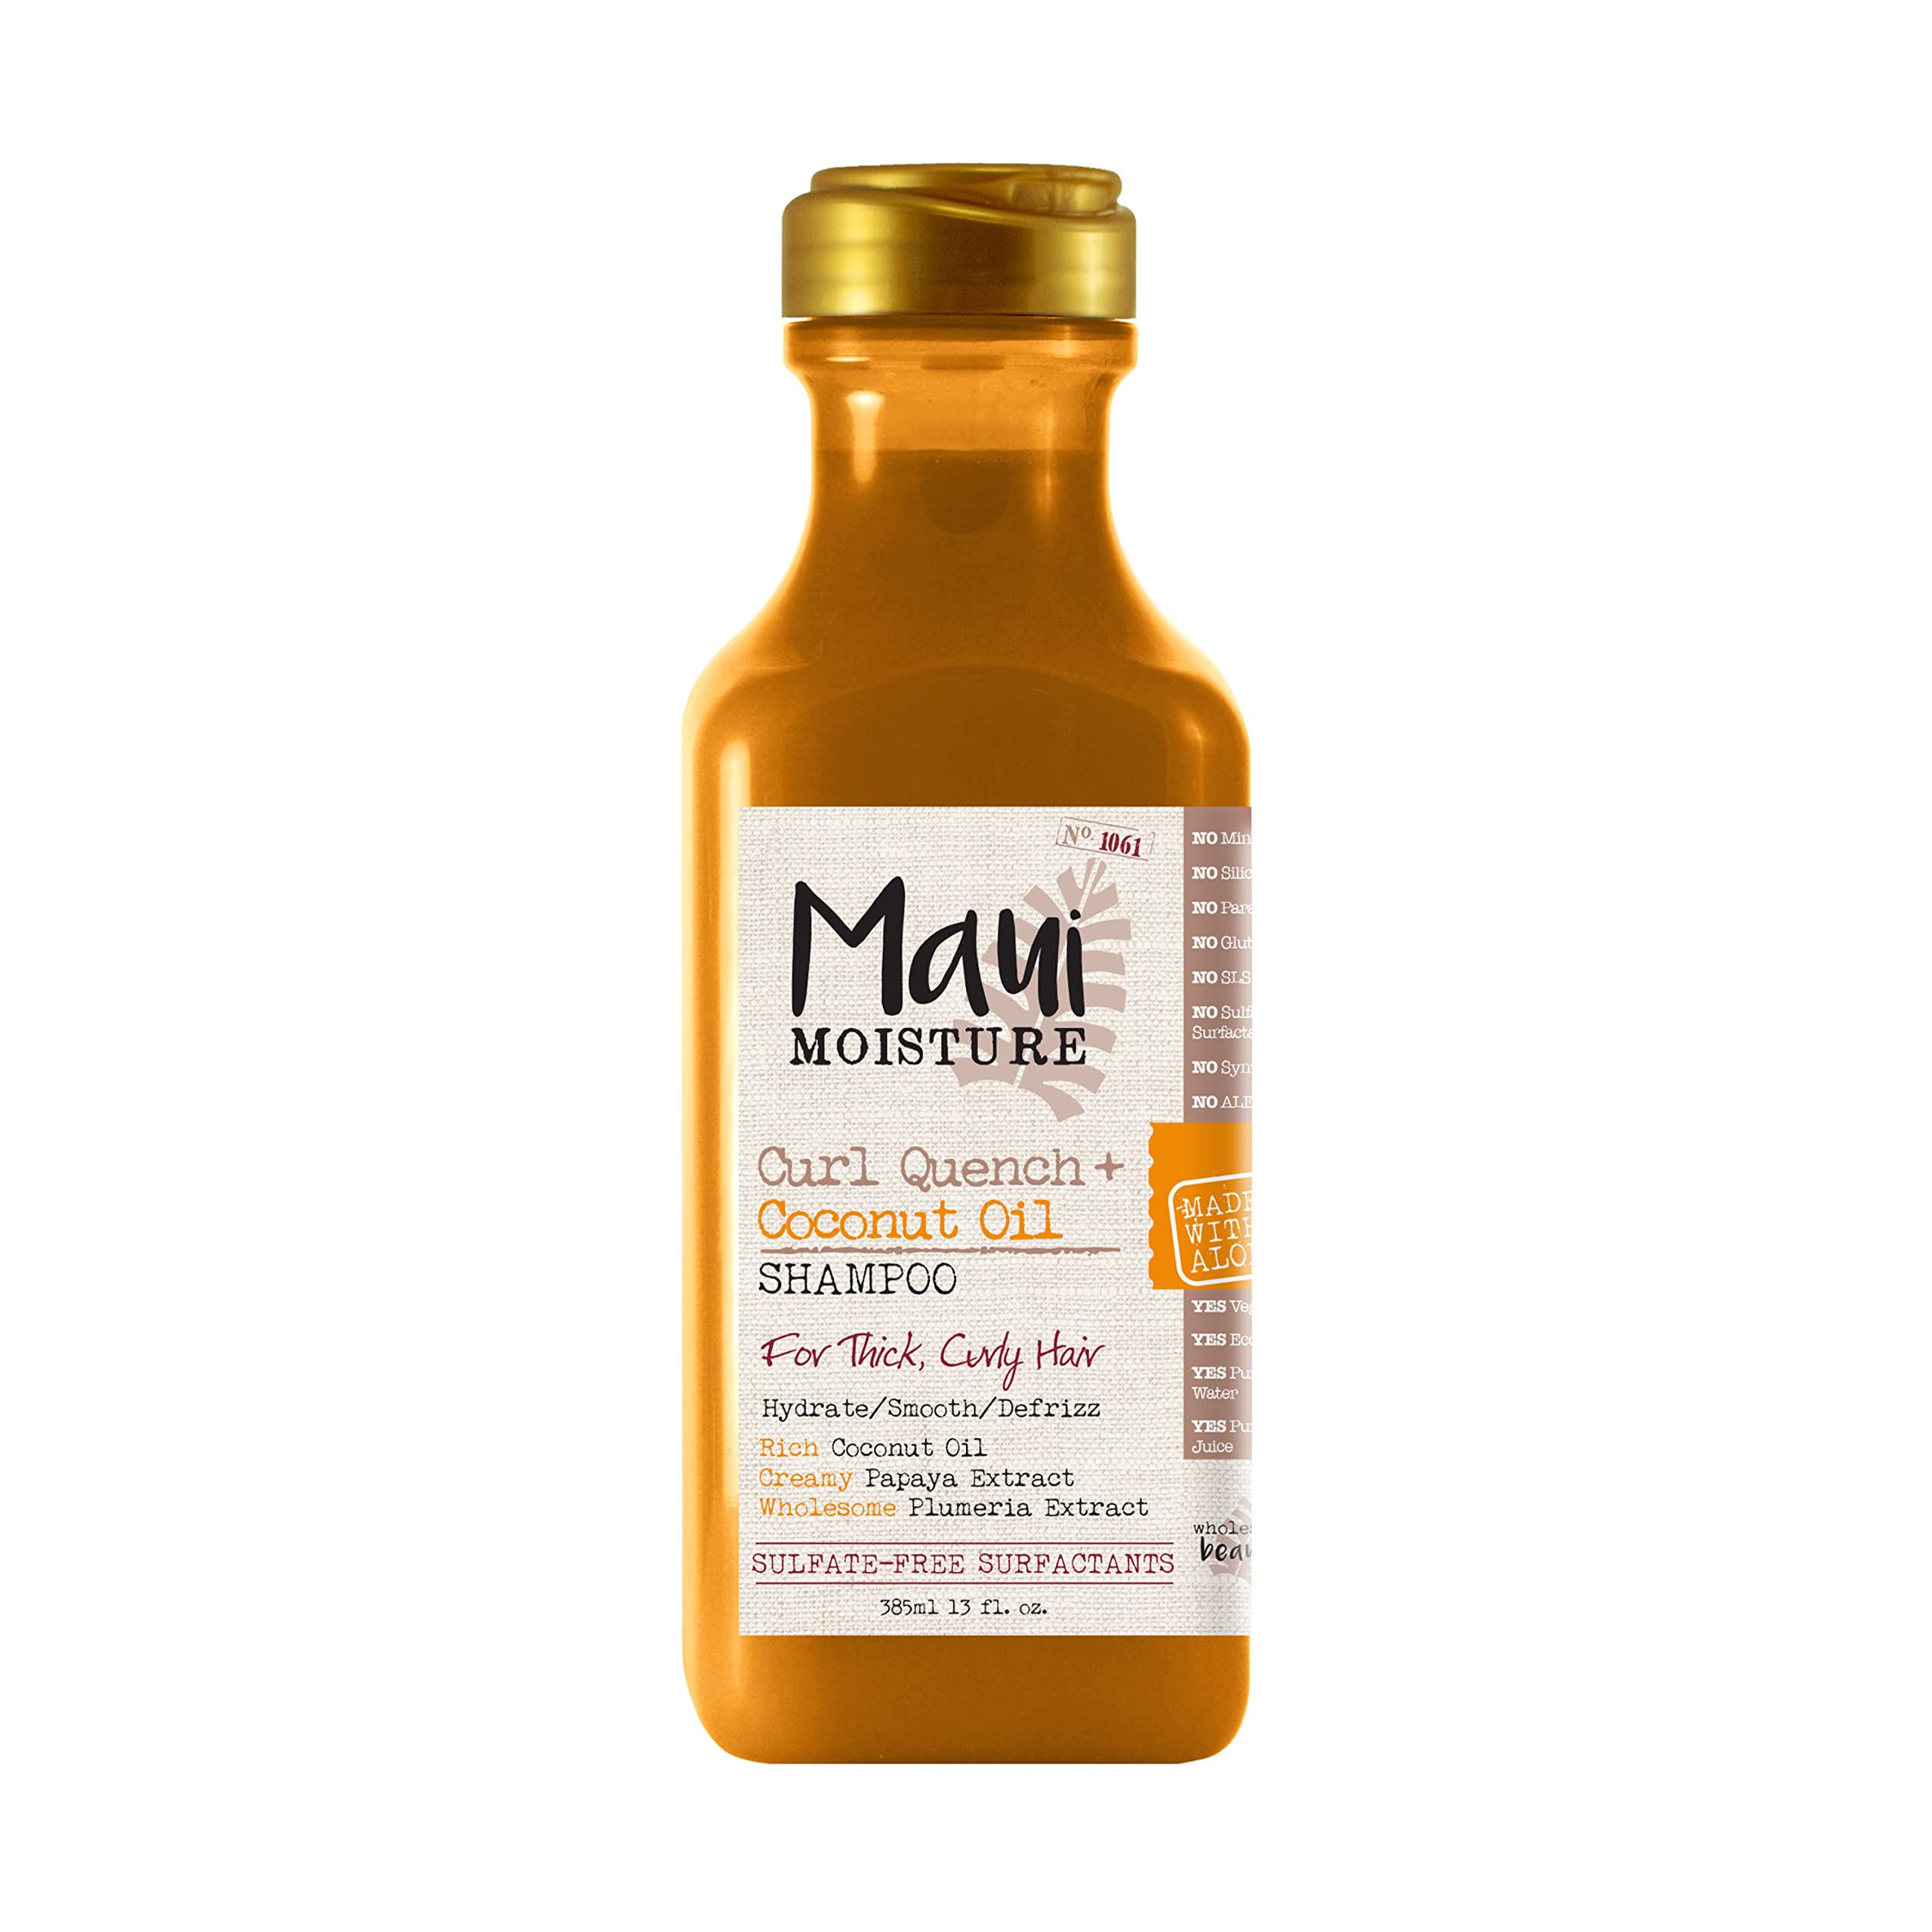 Maui Moisture Curl Quench + Coconut Oil Curl-Defining Anti-Frizz Shampoo to Hydrate and Detangle Tight Curly Hair, Softening Shampoo, Vegan, Silicone & Paraben-Free, 13 fl oz